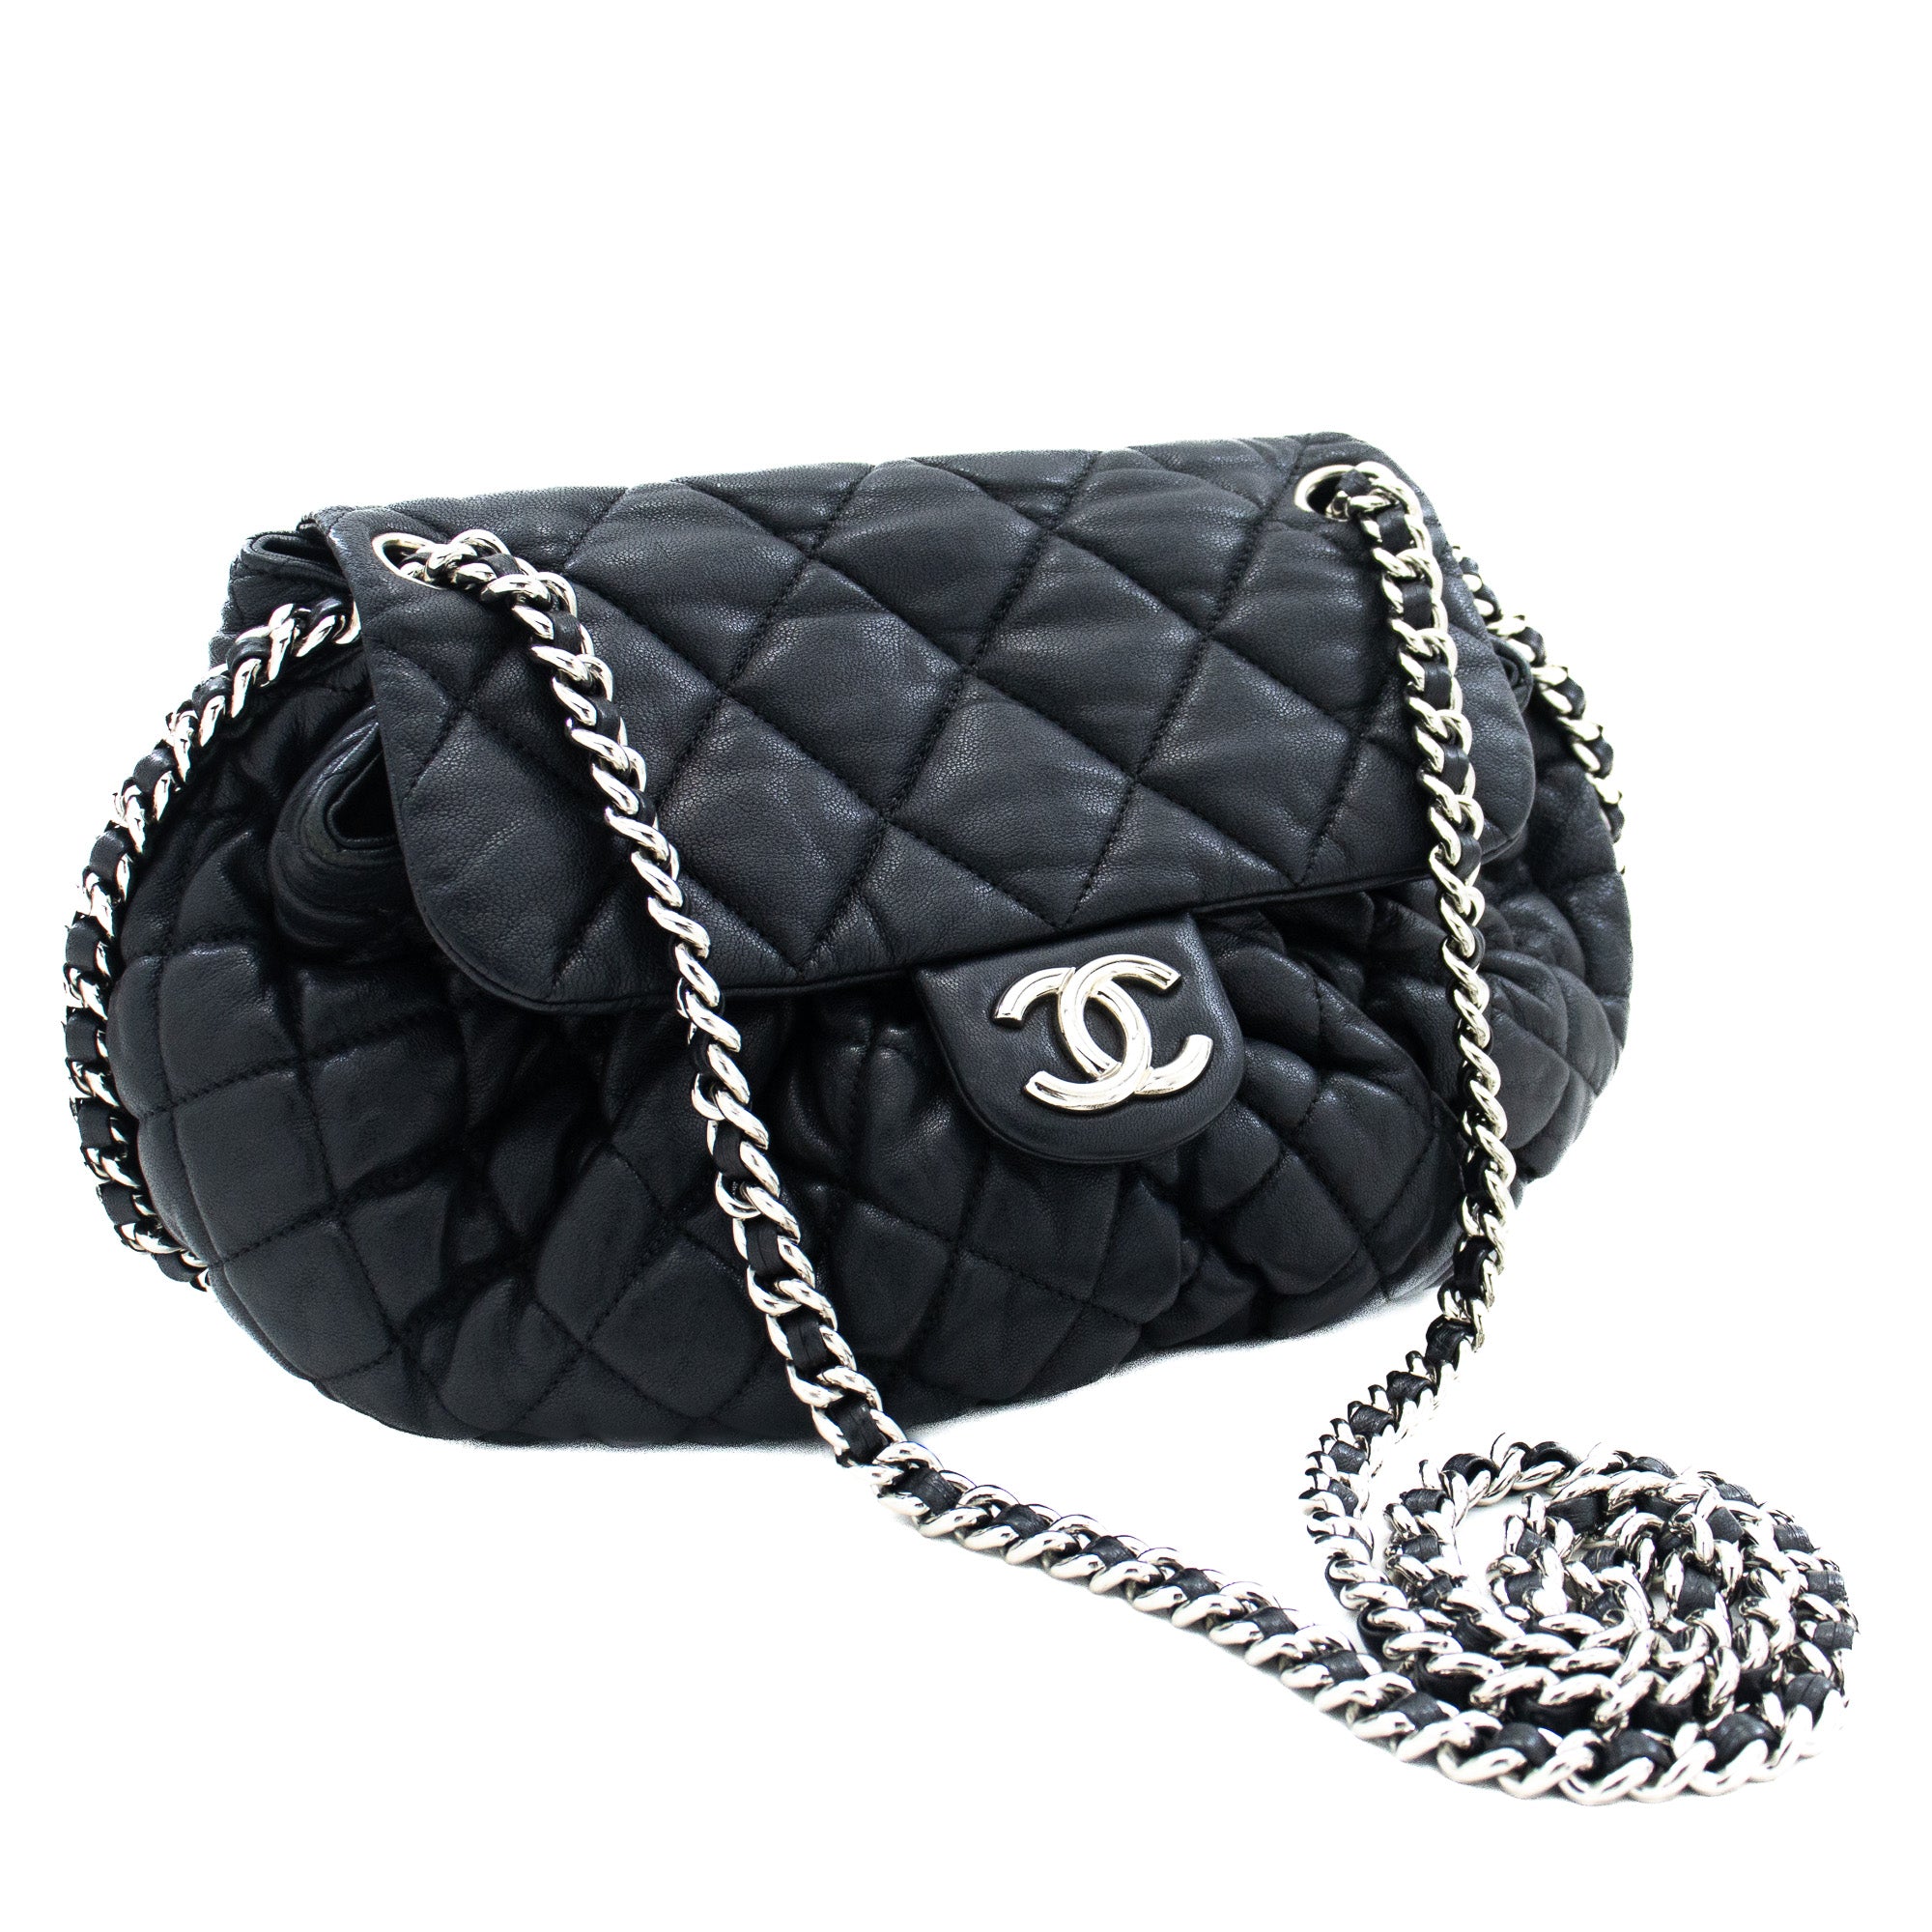 chanel business tote bag